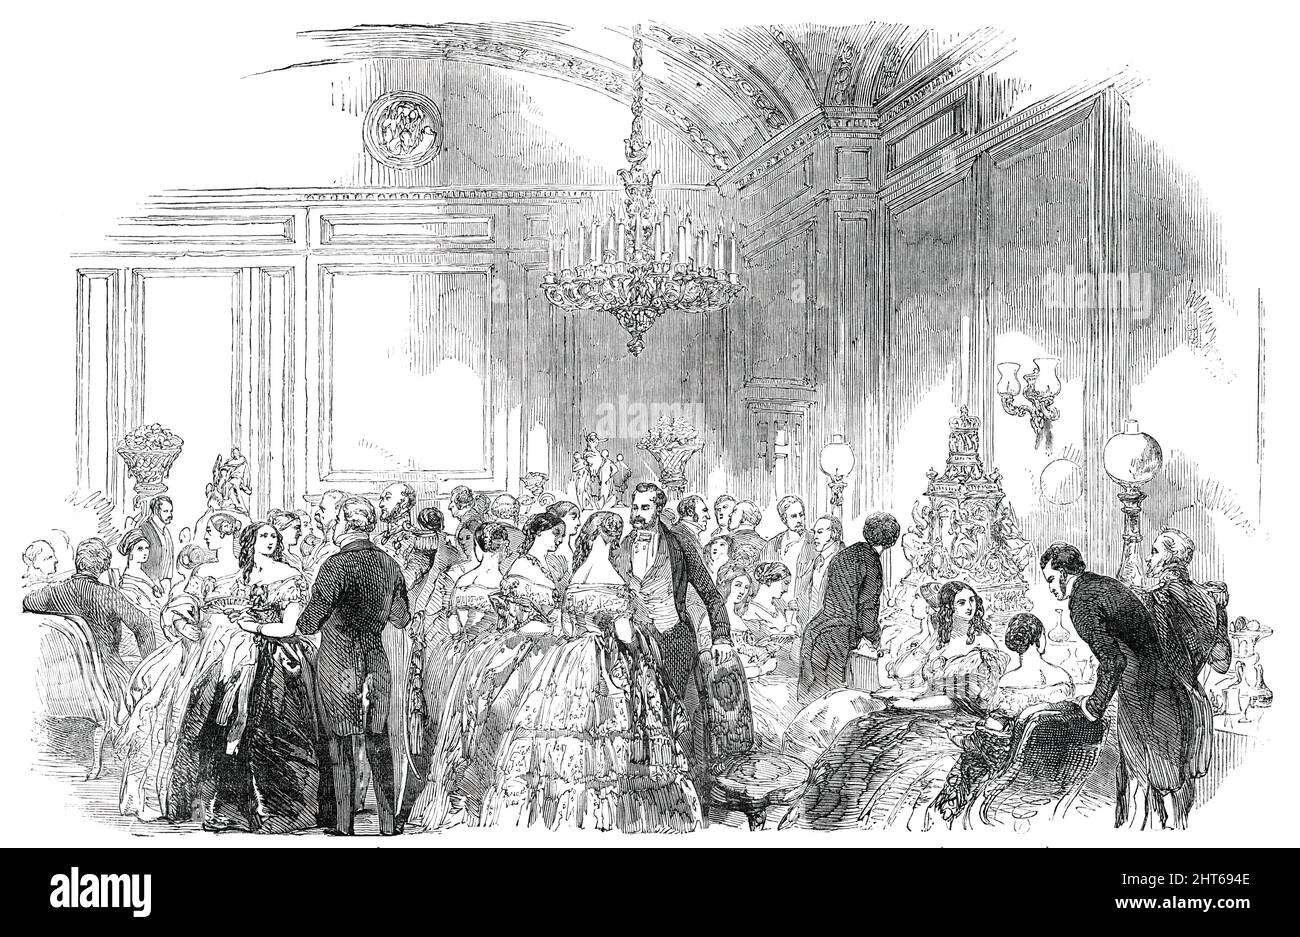 Lady John Russell's Assembly on Wednesday Evening, at Downing-Street - the Refreshment Room, 1850. A party at 10 Downing Street '...the official residence of the Premier [in London]...was honoured with the presence of upwards of 500 distinguished visitors...His Royal Highness the Duke of Cambridge...His Grace the Duke of Wellington and the gallant Lord Gough were present...Among the members of the diplomatic circle present we remarked his Excellency the Turkish Ambassador...The company continued to arrive until nearly midnight, the guests setting down both at the garden entrance and in Downing Stock Photo